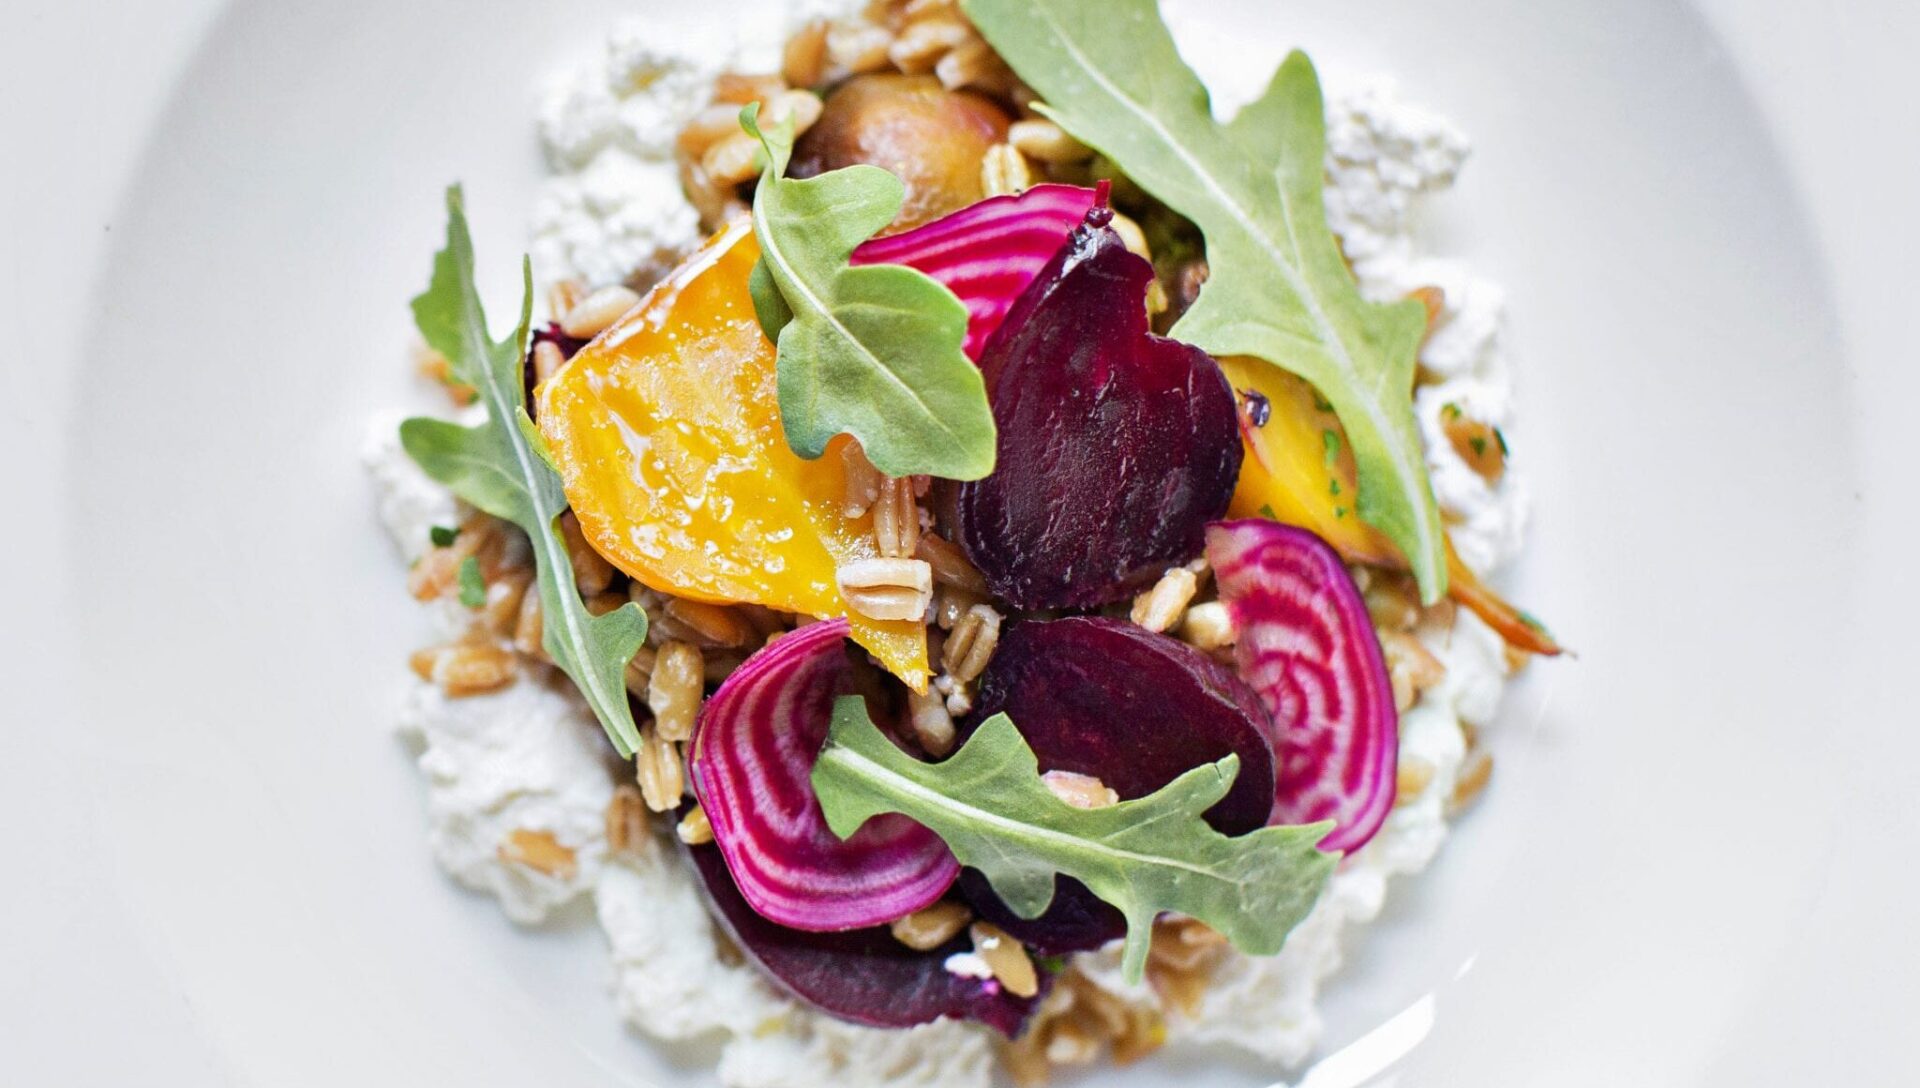 Roasted-Baby-Beets-and-Farro-on-Honeyed-Ricotta-with-Walnuts-e1709038211704.jpg